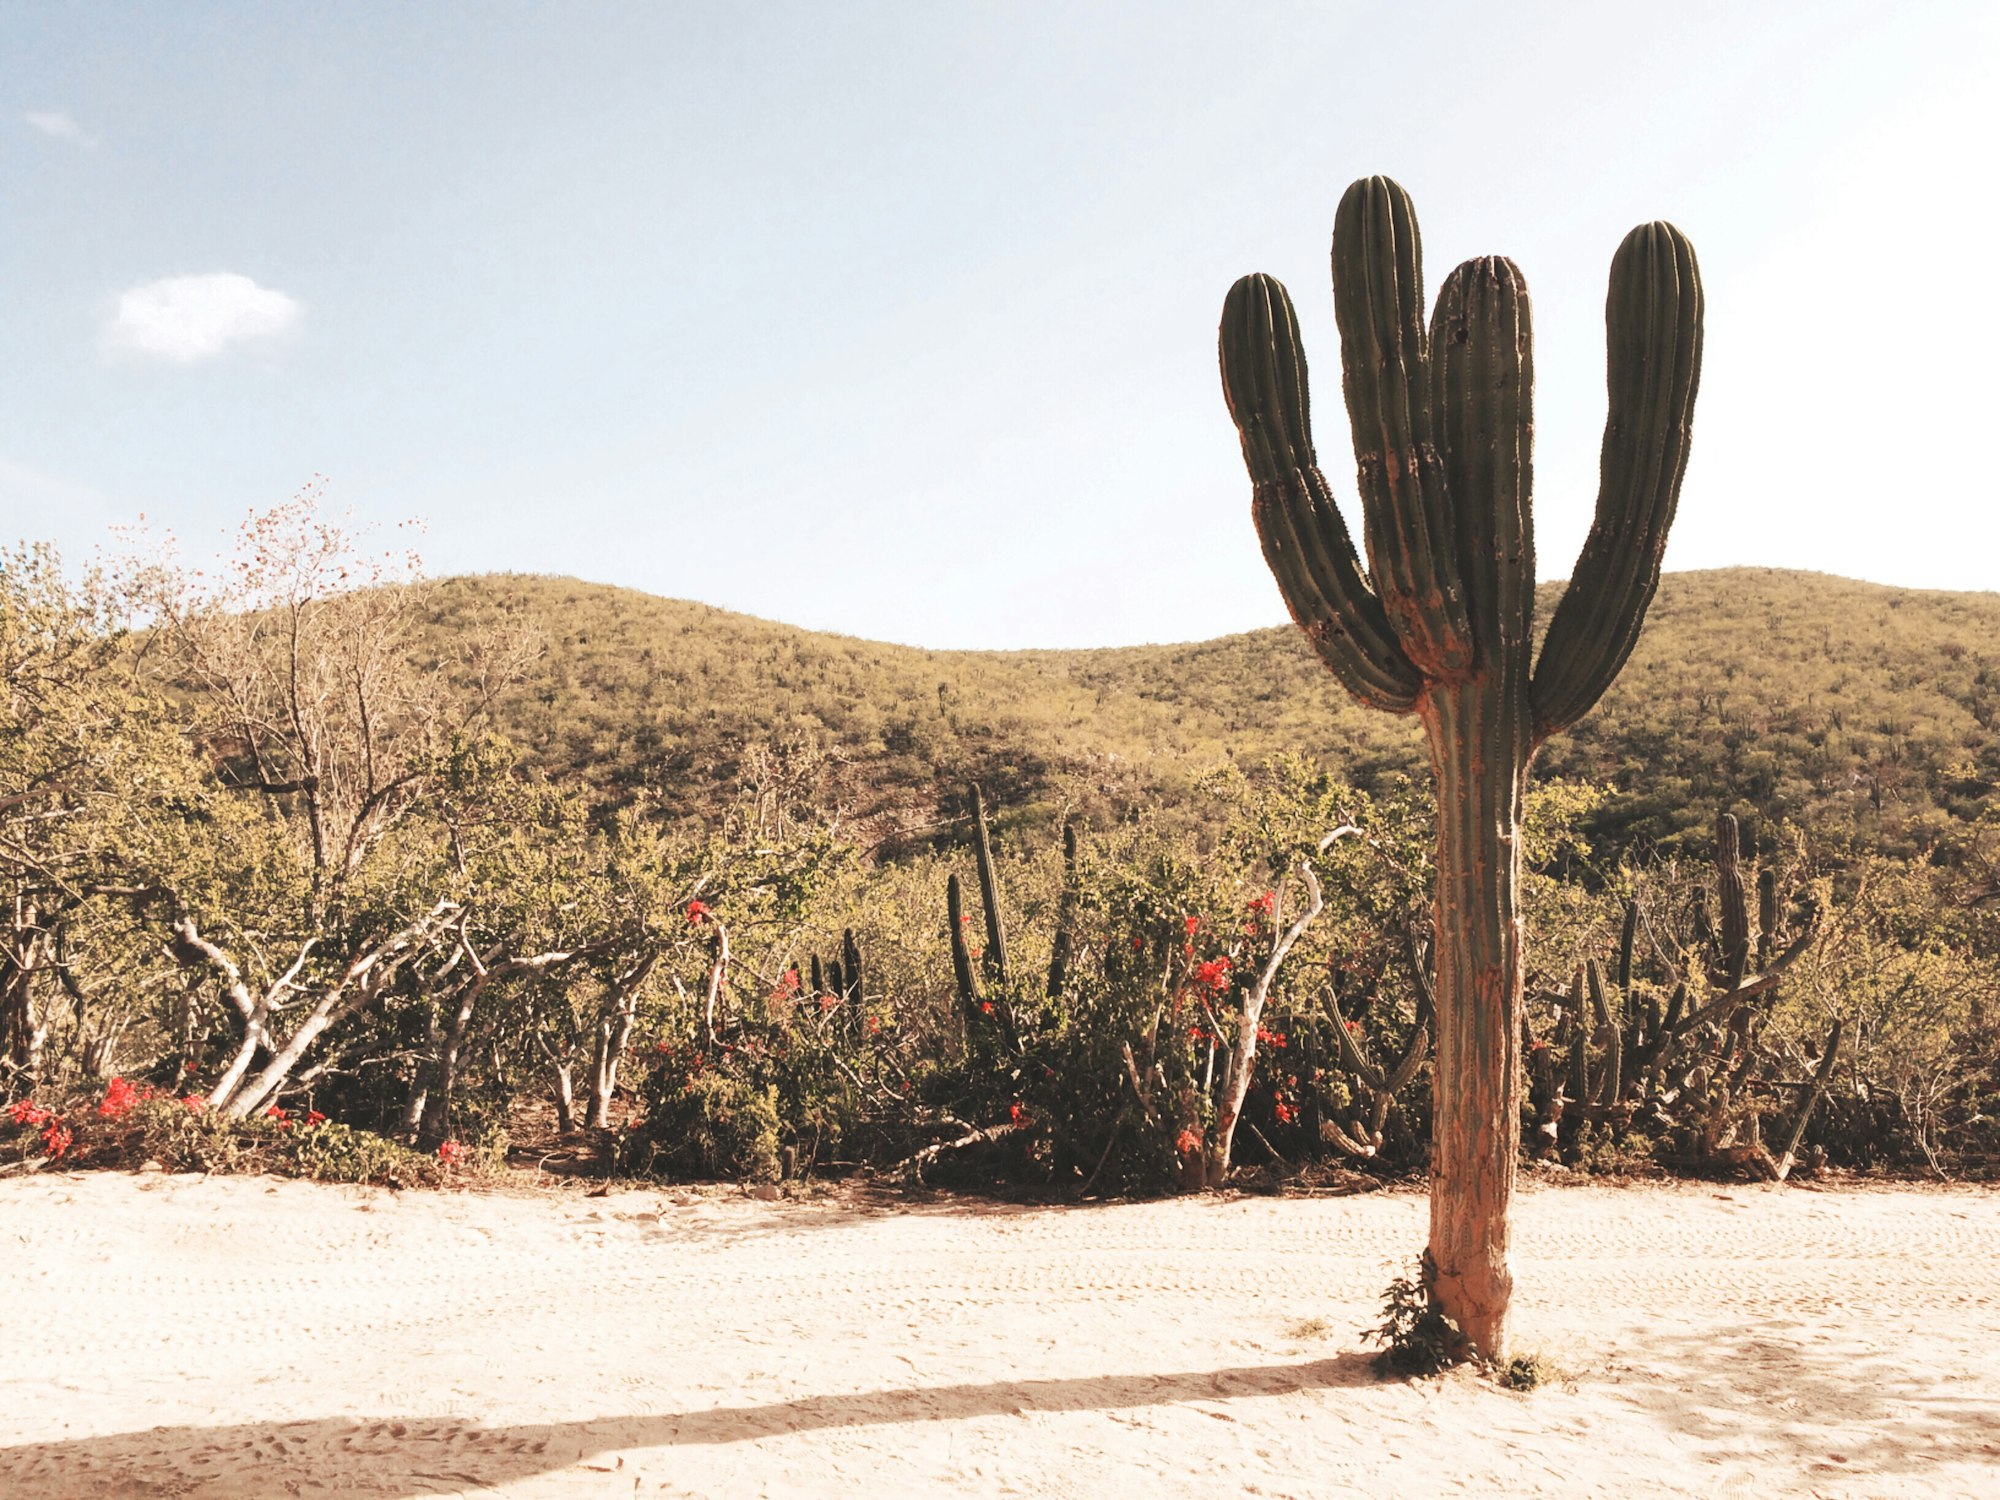 A tall cactus in Baja, Mexico